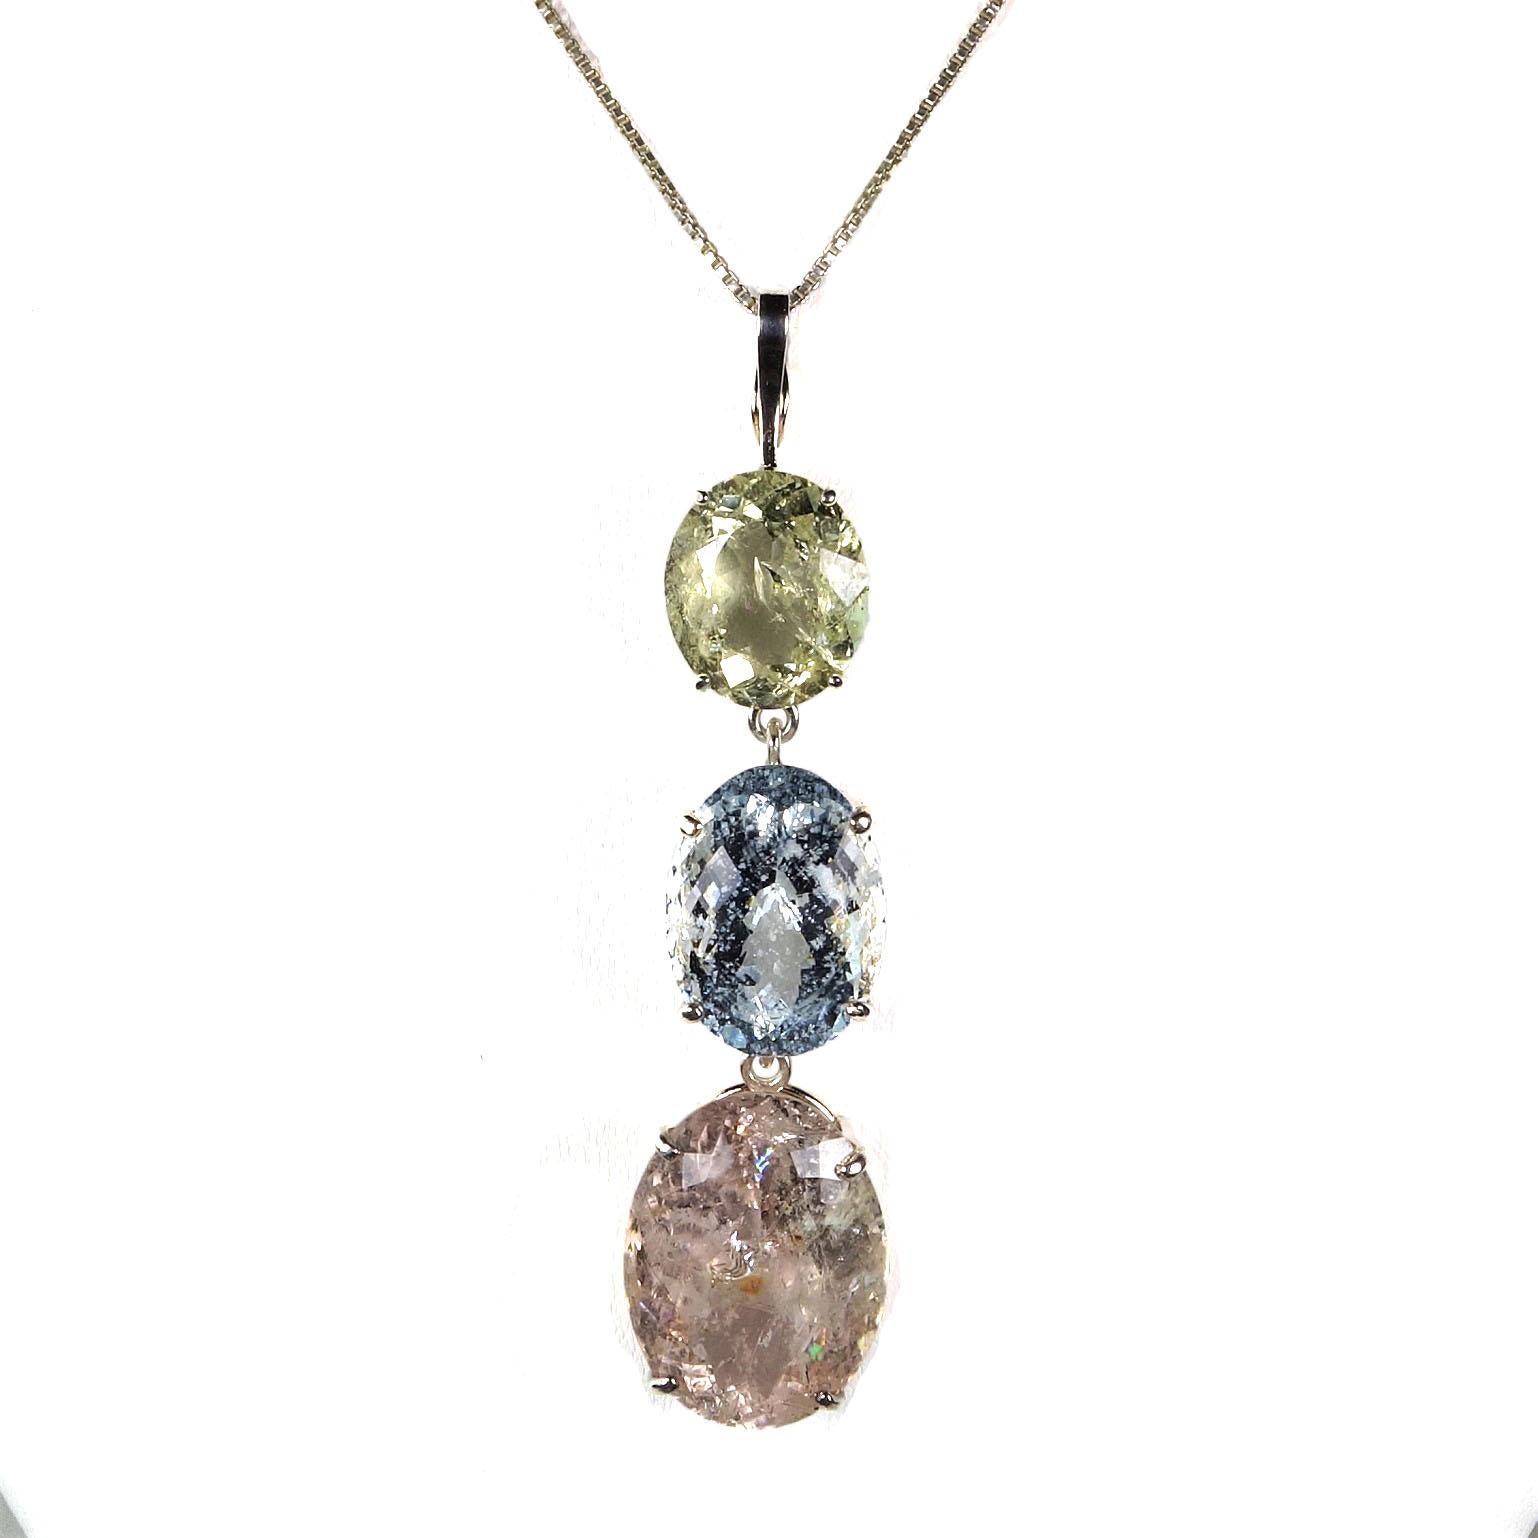 
Custom made, huge Beryl Pendant of Sterling Silver Baskets holding three Oval Beryls. The top is a yellow Heliodor, the middle is blue Aquamarine, and the bottom oval is a peachy-pink Morganite. The entire pendant is 2 7/8 inches from the top of